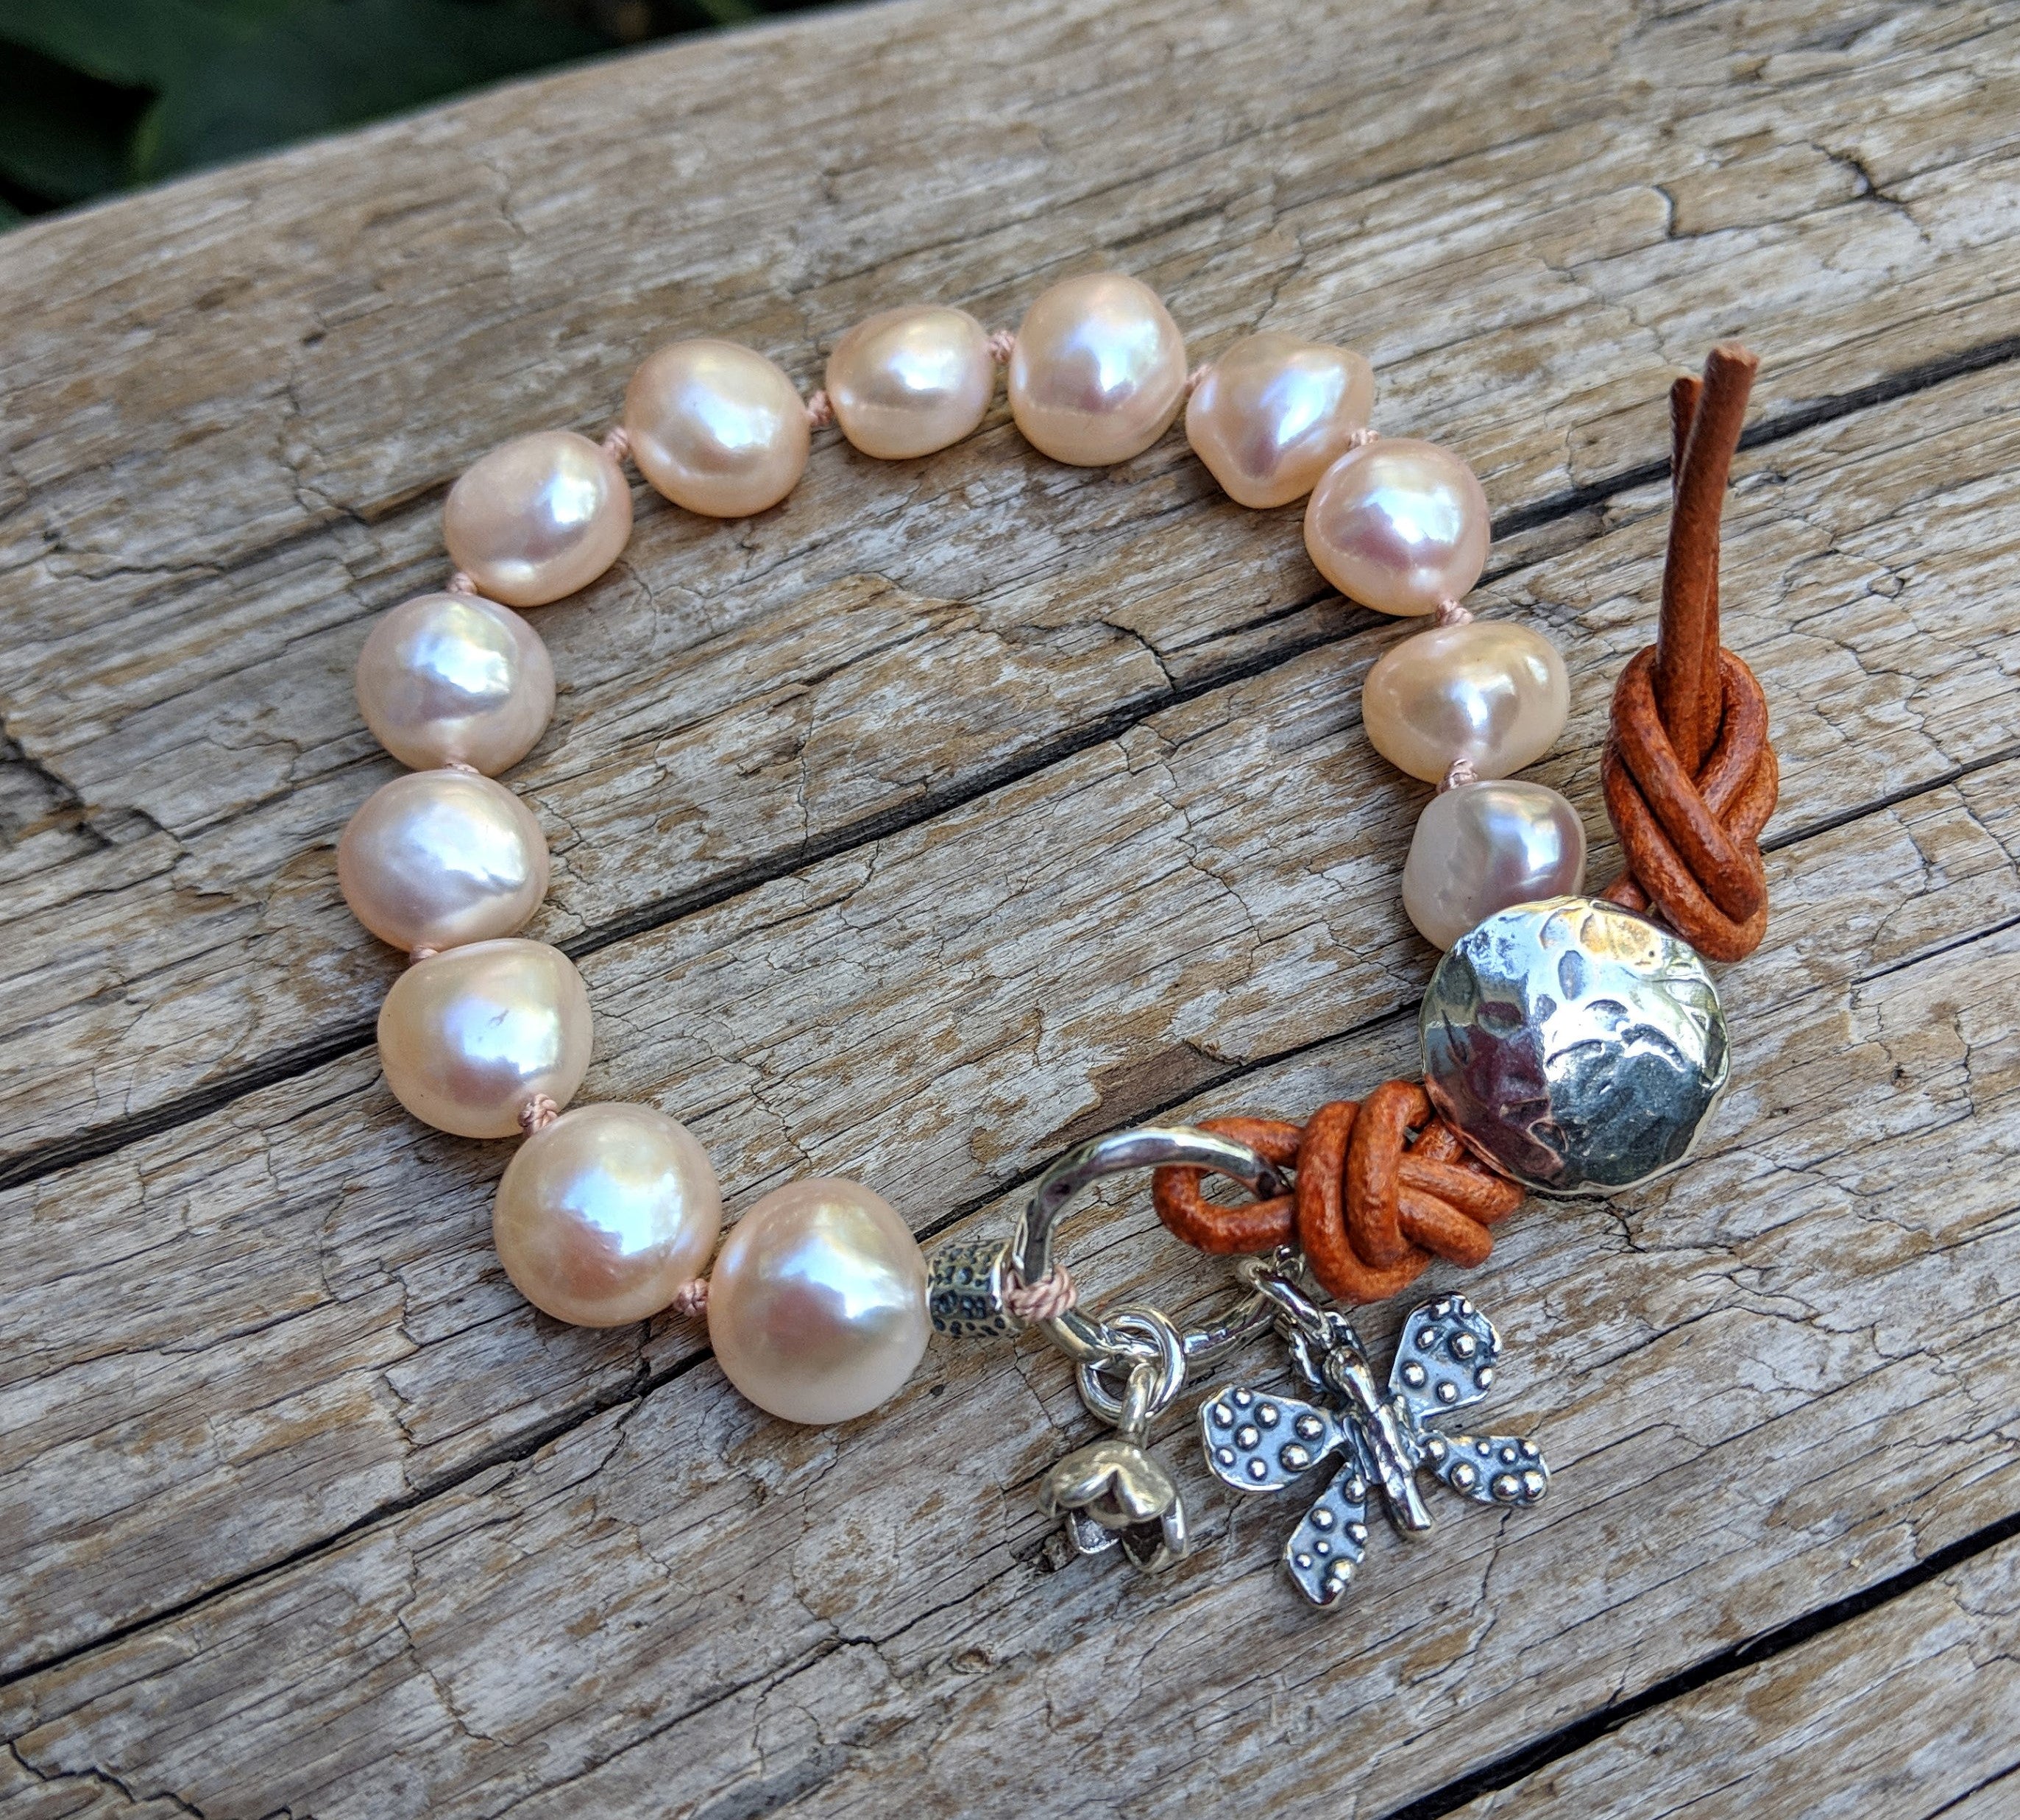 This beautiful one-of-a-kind chic handmade artisan bracelet combines beautiful soft pink-peach baroque pearls with sterling silver flower and butterfly charms, accented by leather elements for an organic look. The beautiful natural rose pink shades radiate chic femininity, staying true to nature. 